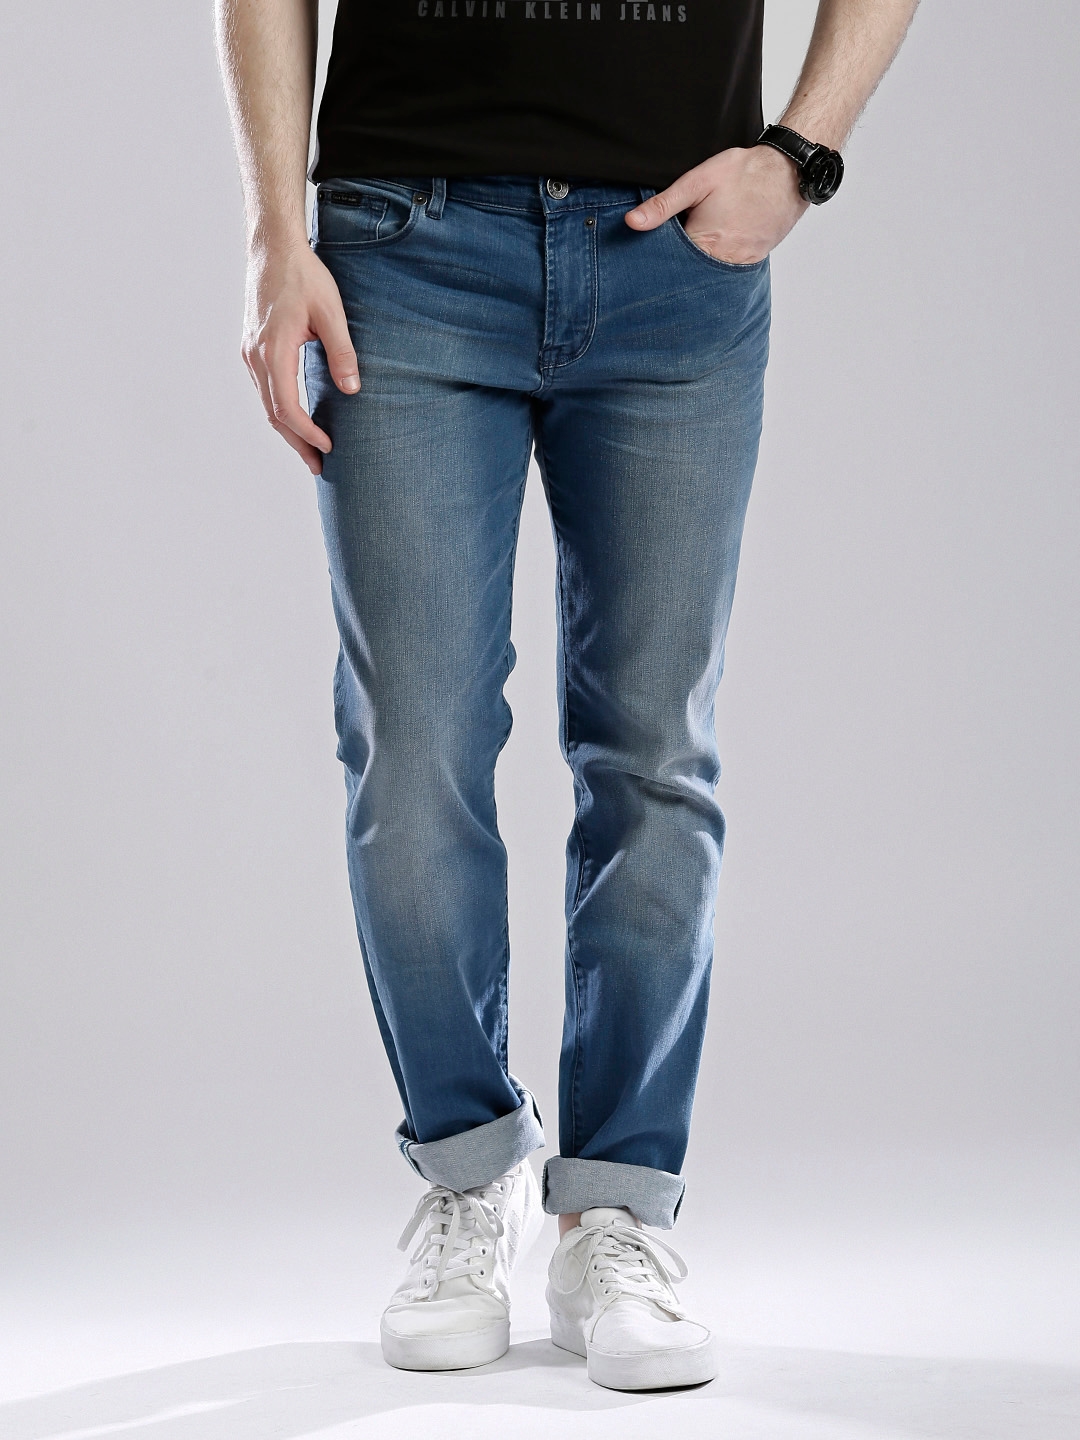 Buy Calvin Klein Jeans Blue Washed Body Fit Jeans - Jeans for Men 1290364 |  Myntra